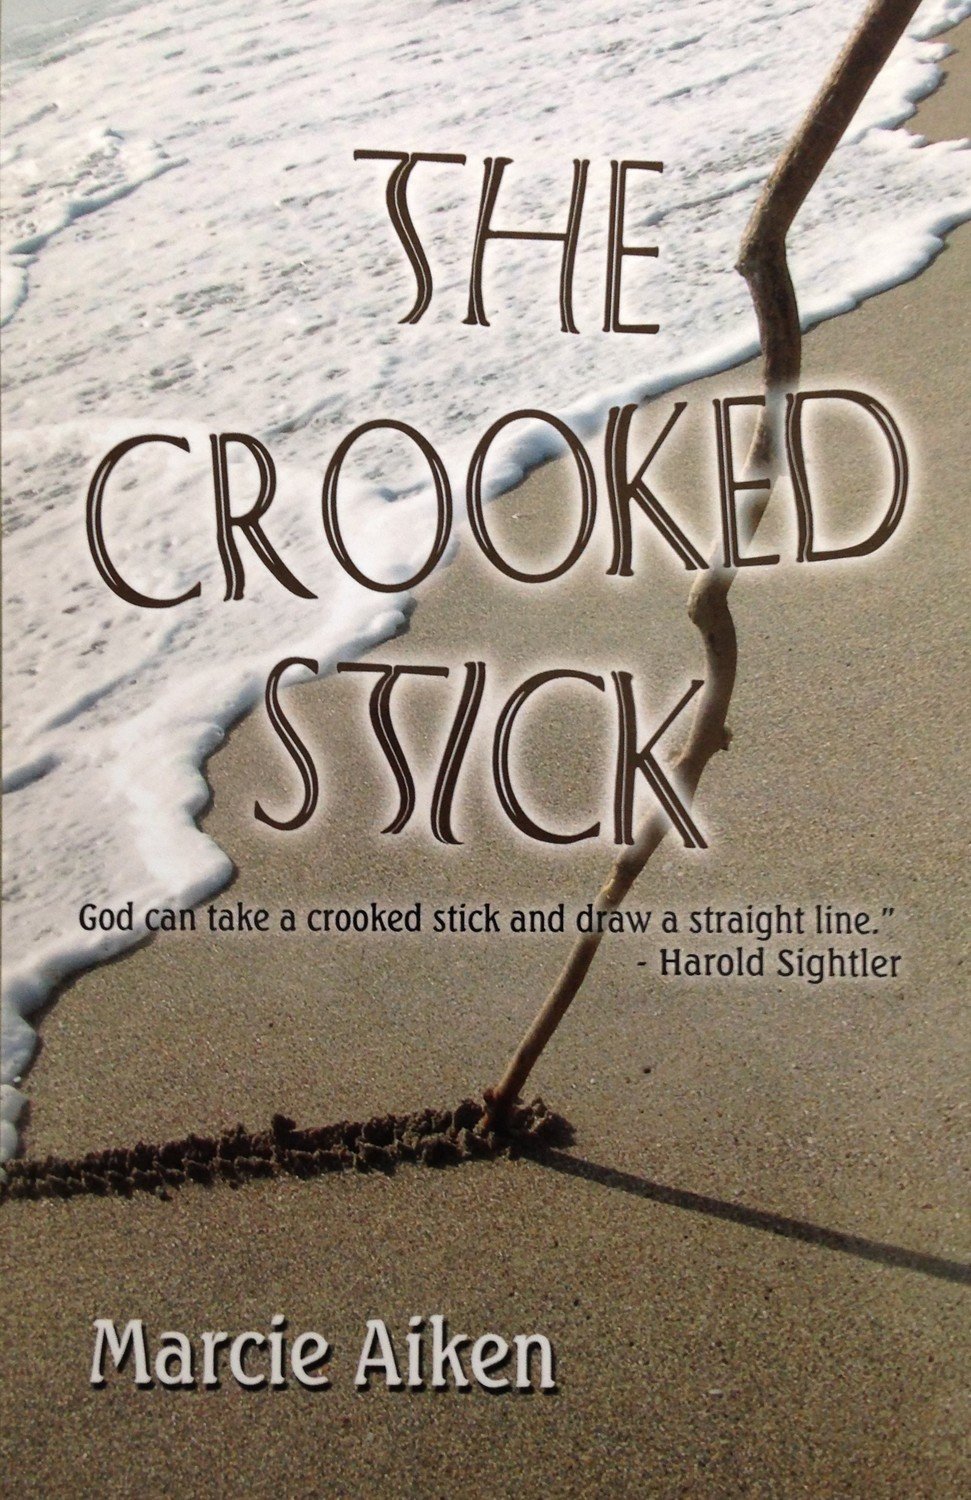 The Crooked Stick by Mrs. Marcie Aiken